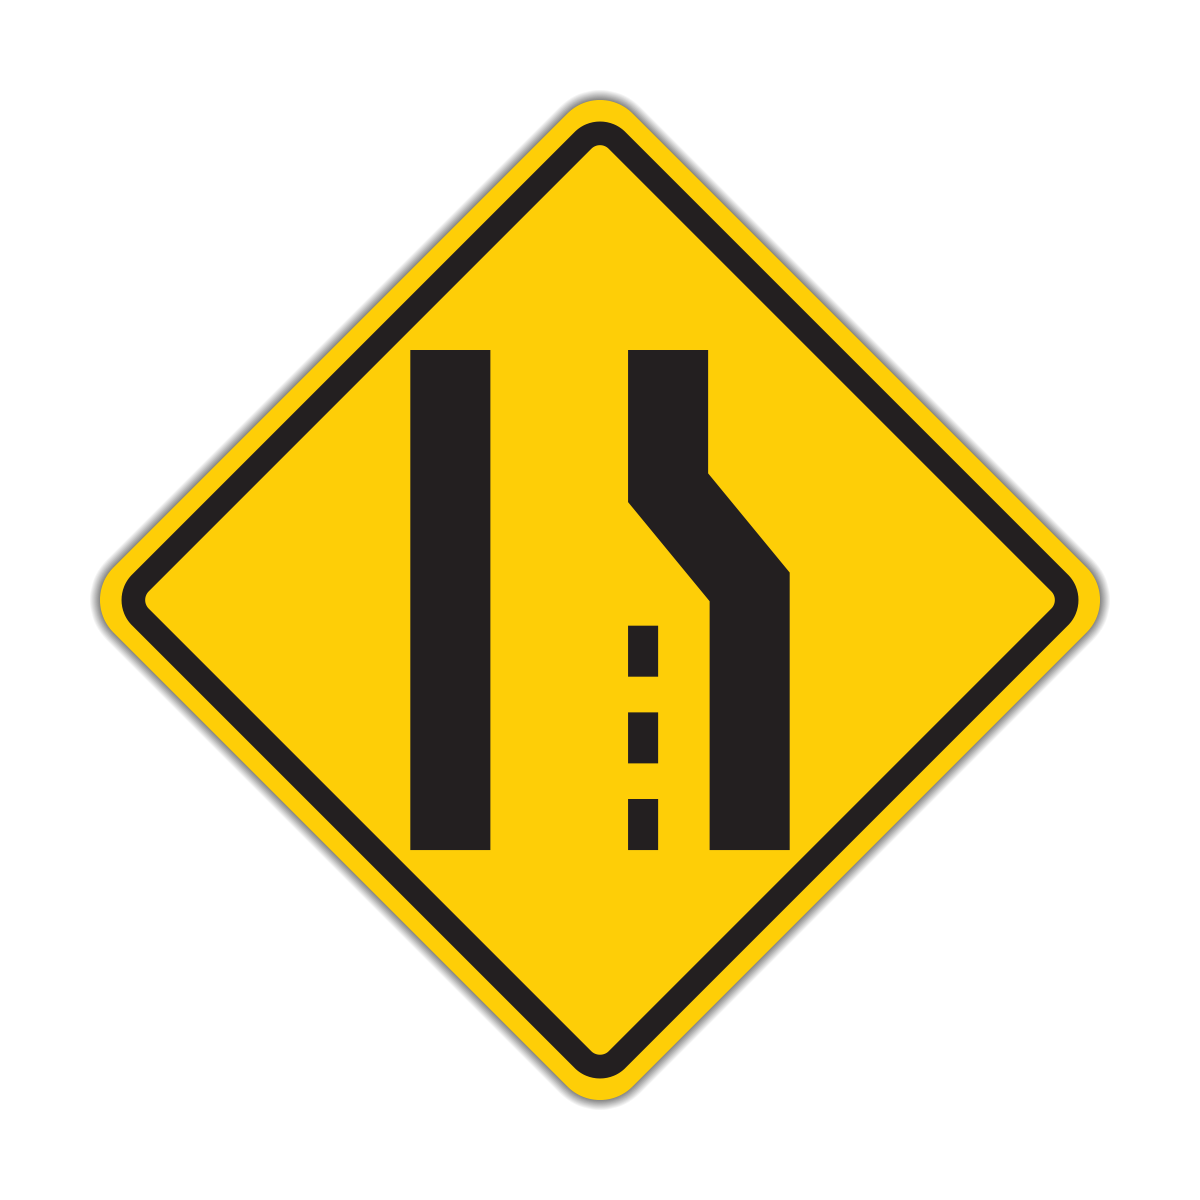 Lane Ends Sign (W4-2)